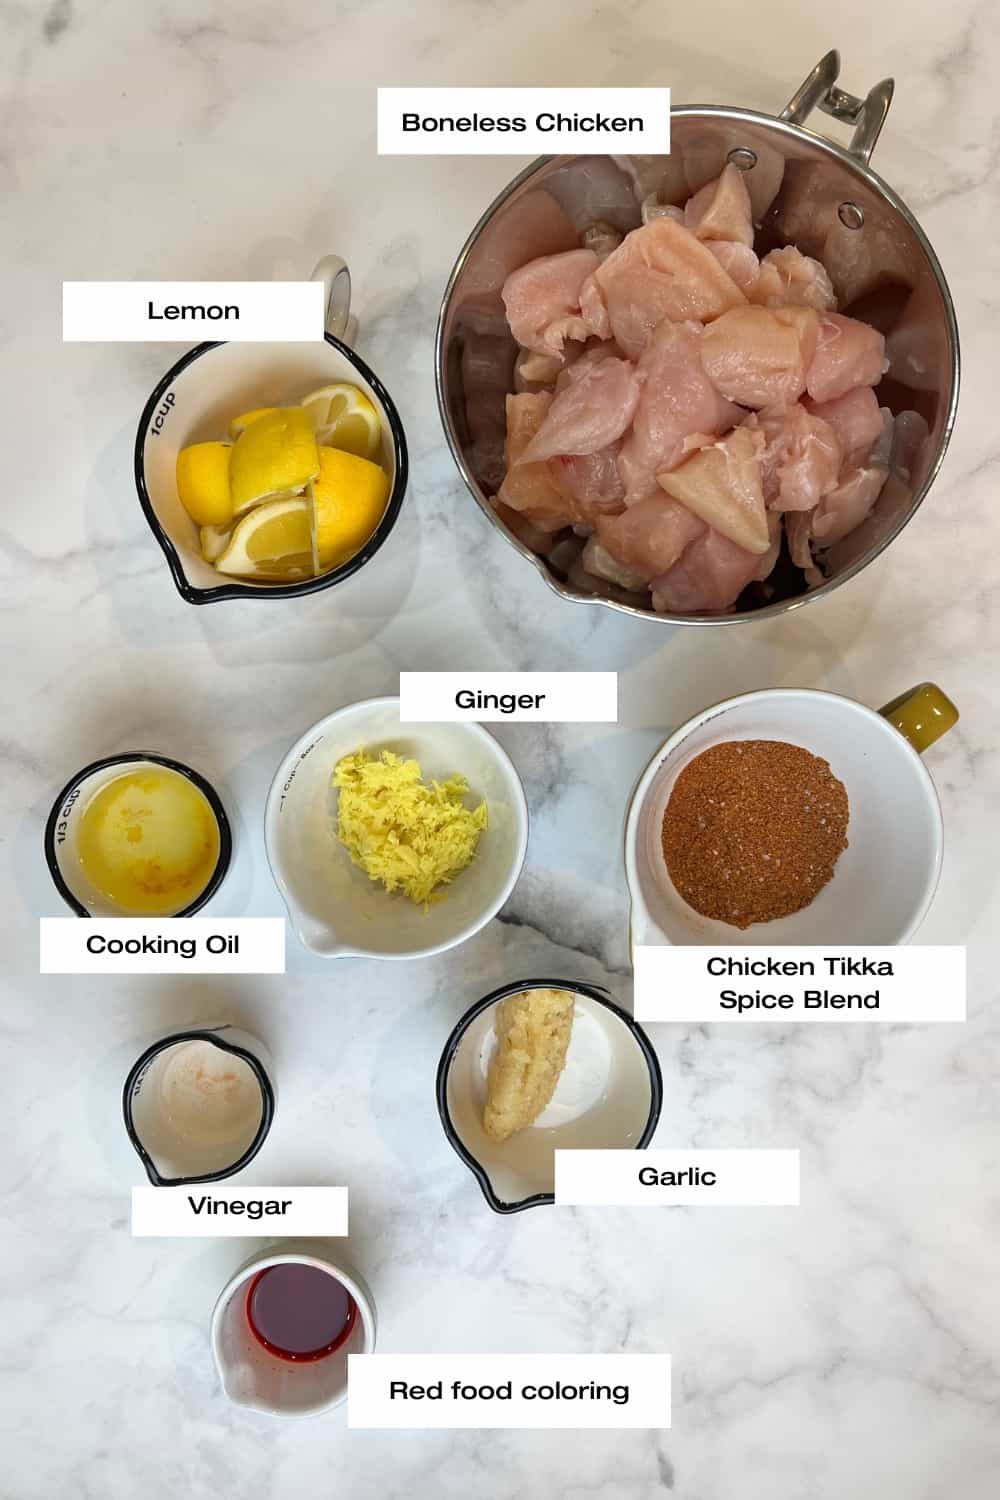 white kitchen counter with bowls filled with boneless chicken, lemons, cooking oil, white vinegar, garlic, ginger, chicken tikka spice blend and red food color.